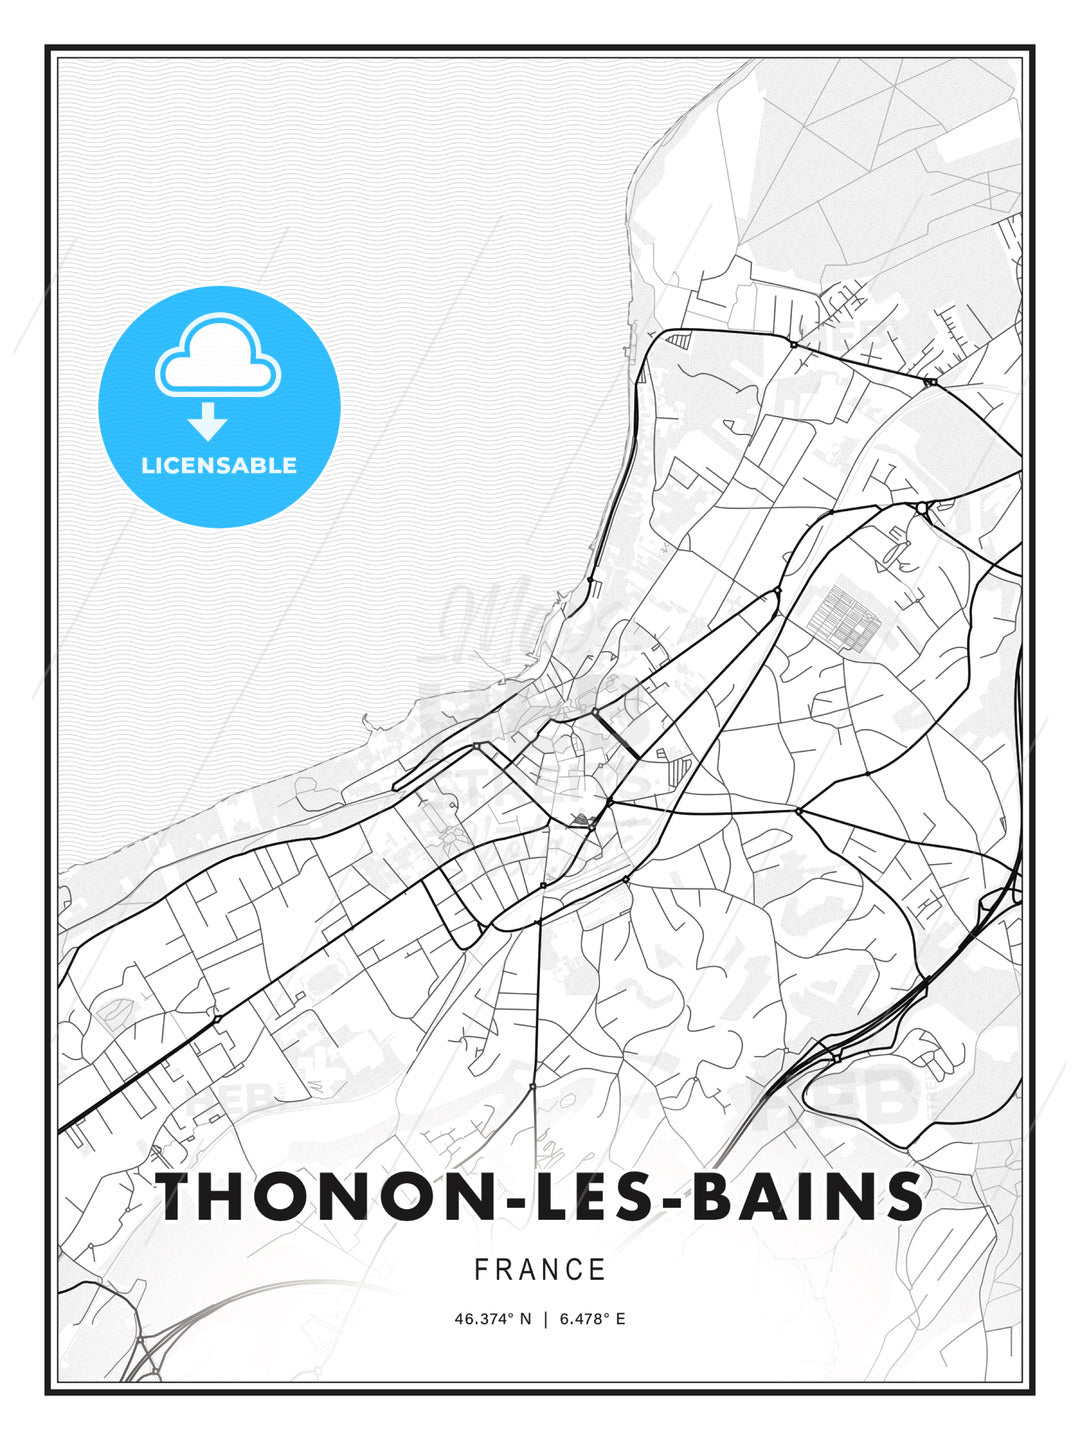 Thonon-les-Bains, France, Modern Print Template in Various Formats - HEBSTREITS Sketches